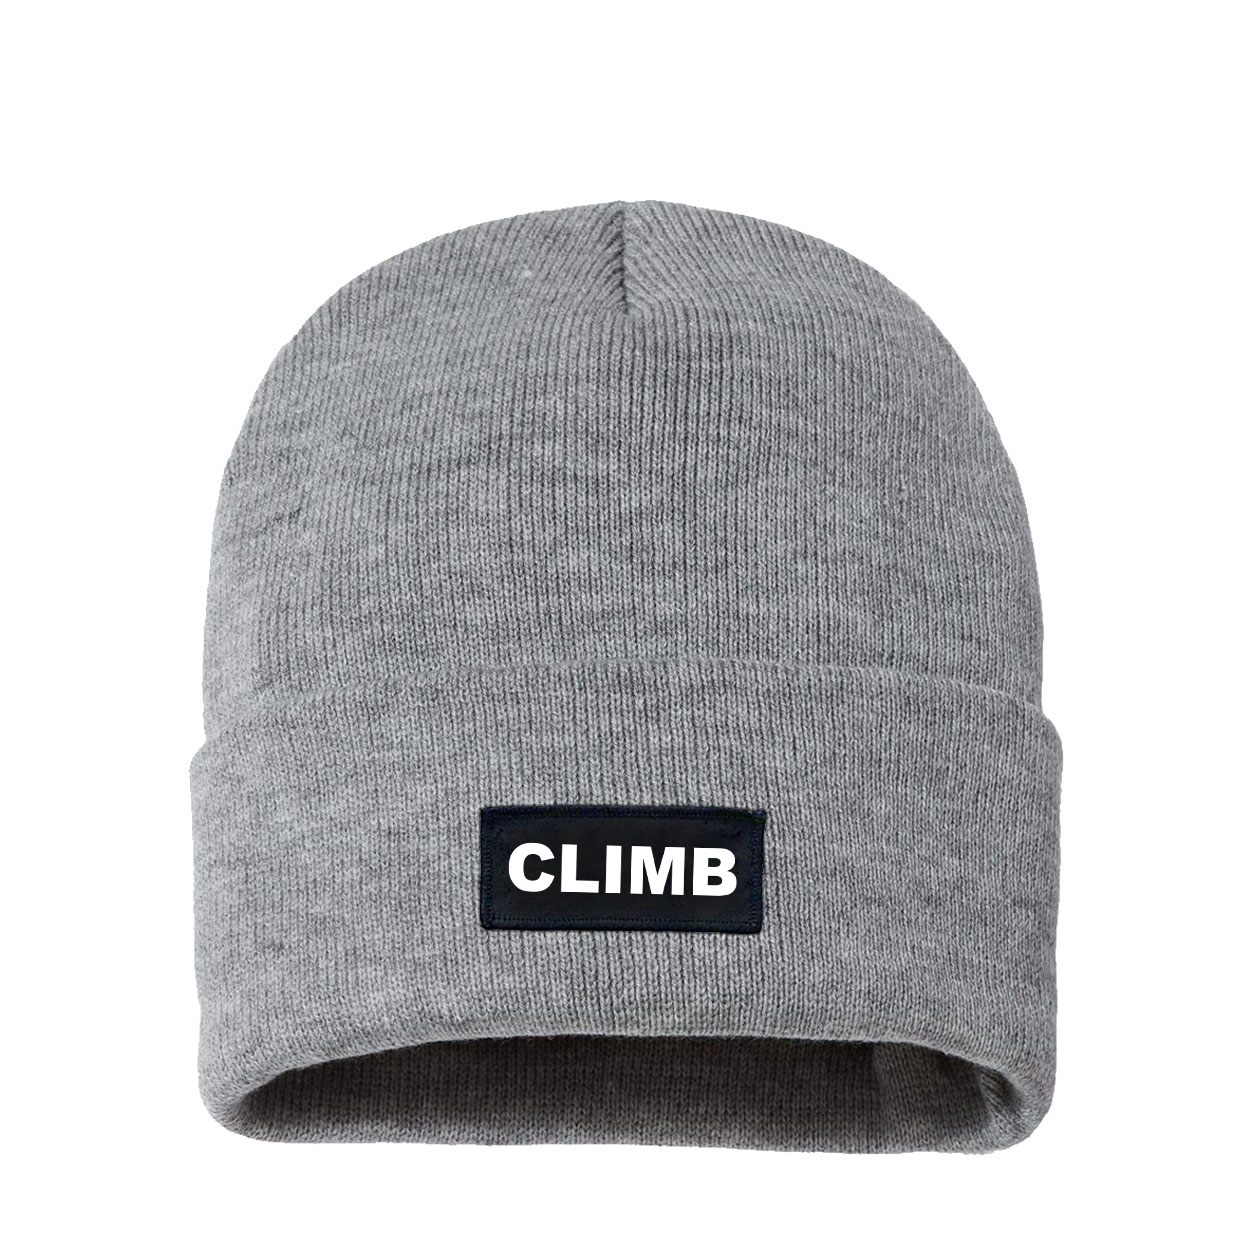 Climb Brand Logo Night Out Woven Patch Sherpa Lined Cuffed Beanie Heather Gray